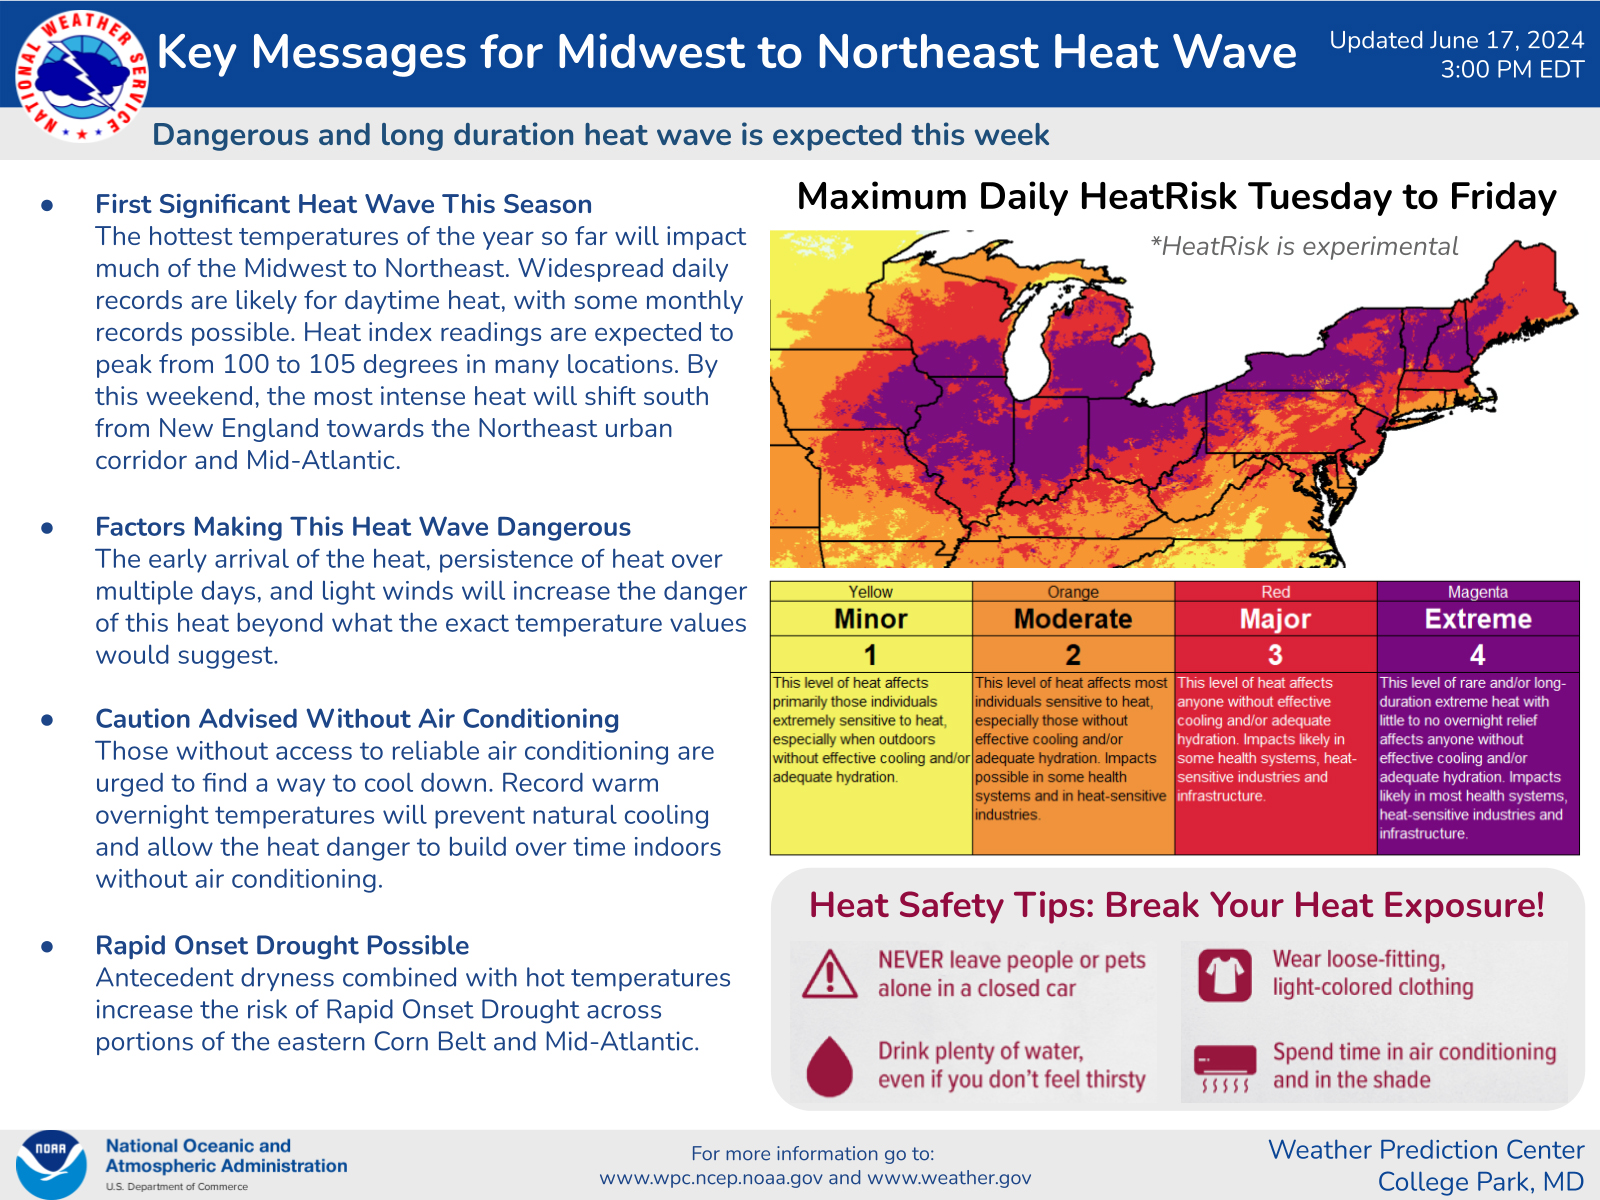 Infographic showing map and key points about heatwave